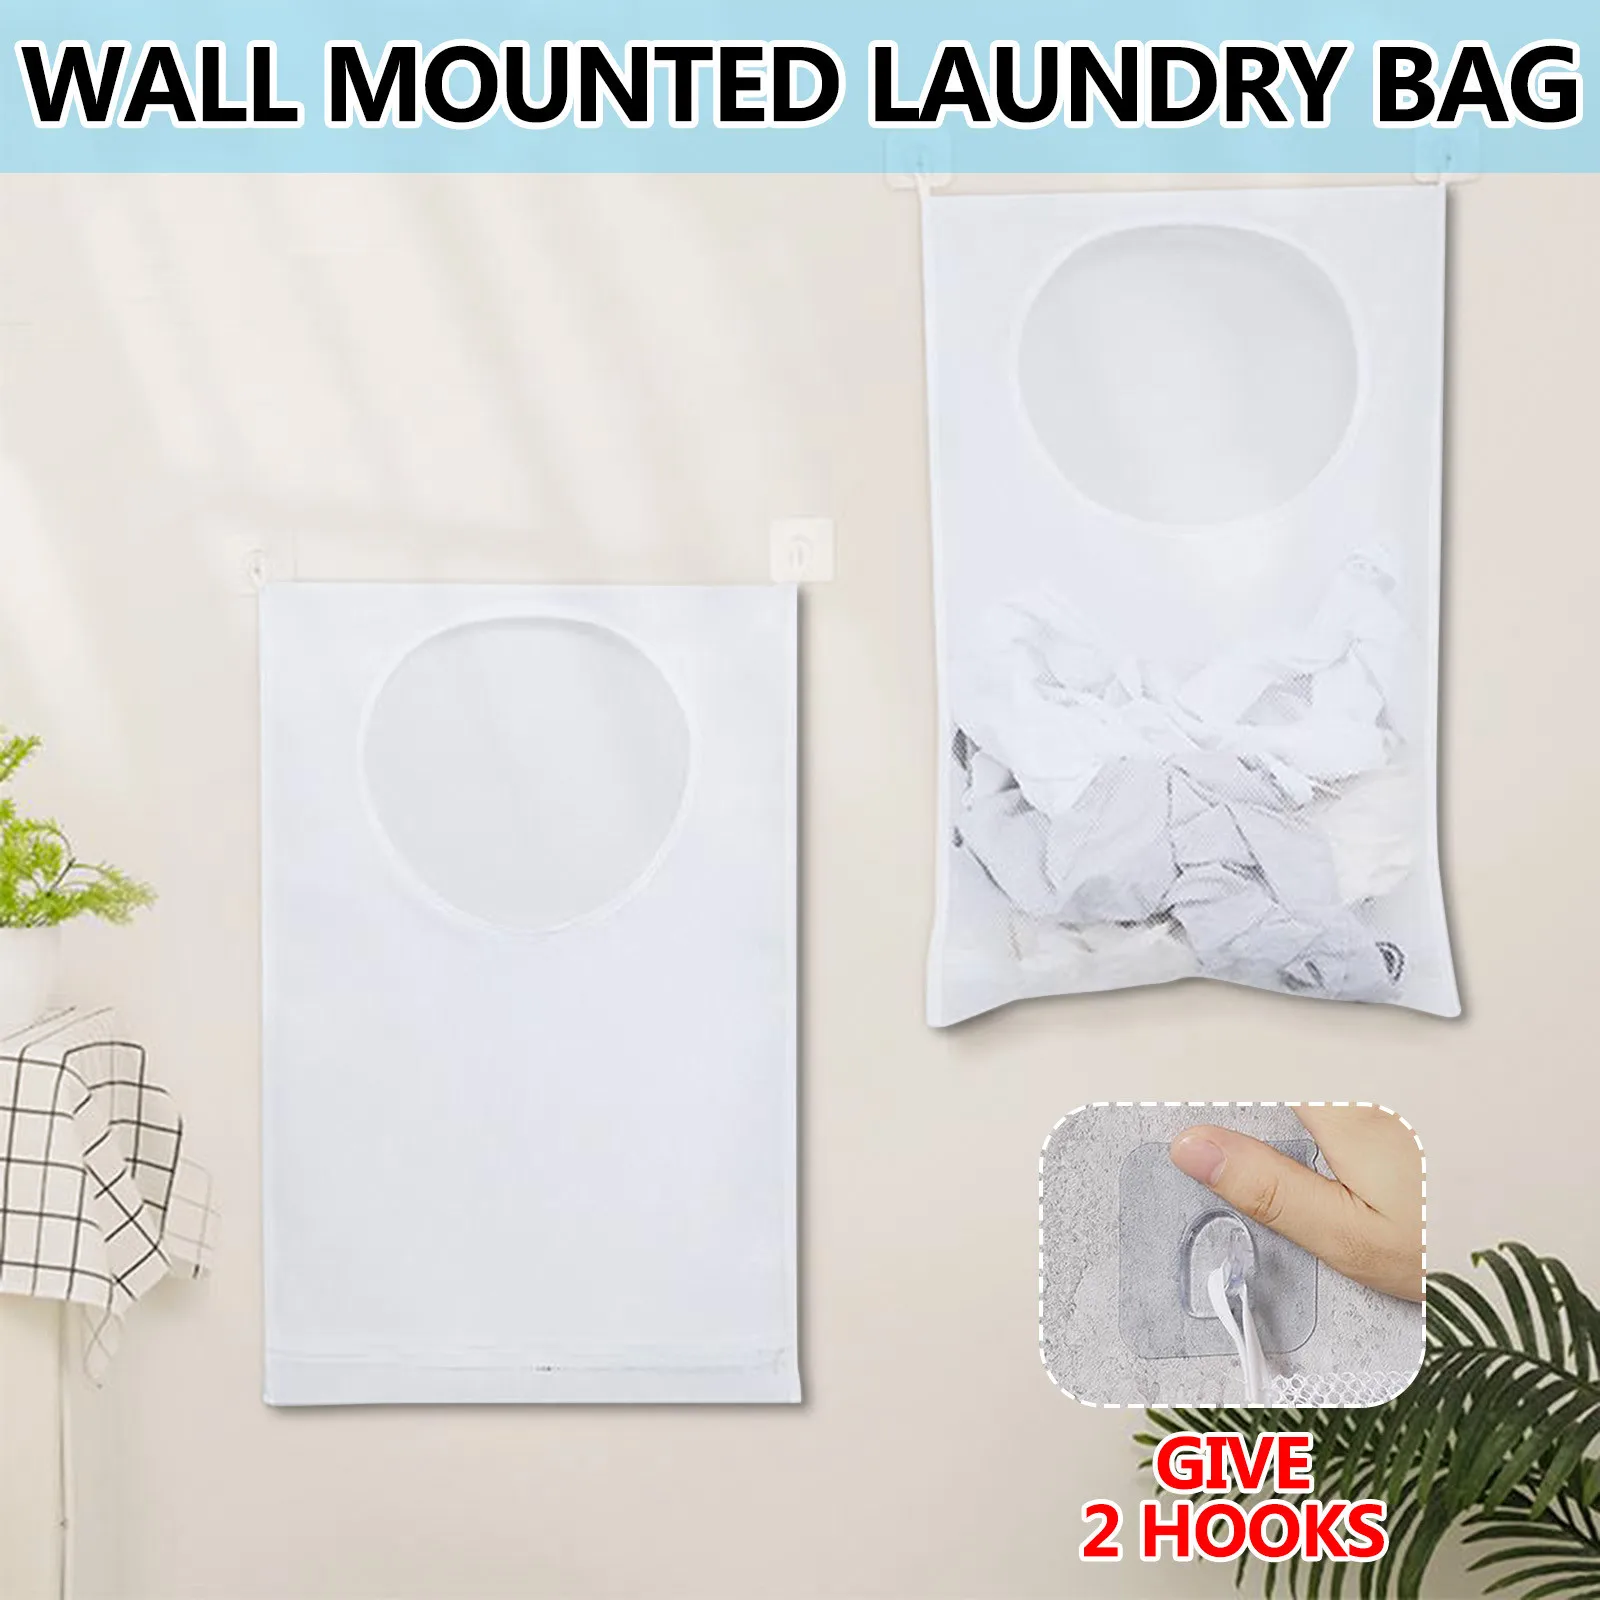 Hanging Laundry Hamper Bag With Free Adjustable Stainless Steel Door 2P Suction Cup Hooks Holding Dirty Clothes And Saving Space double laundry basket